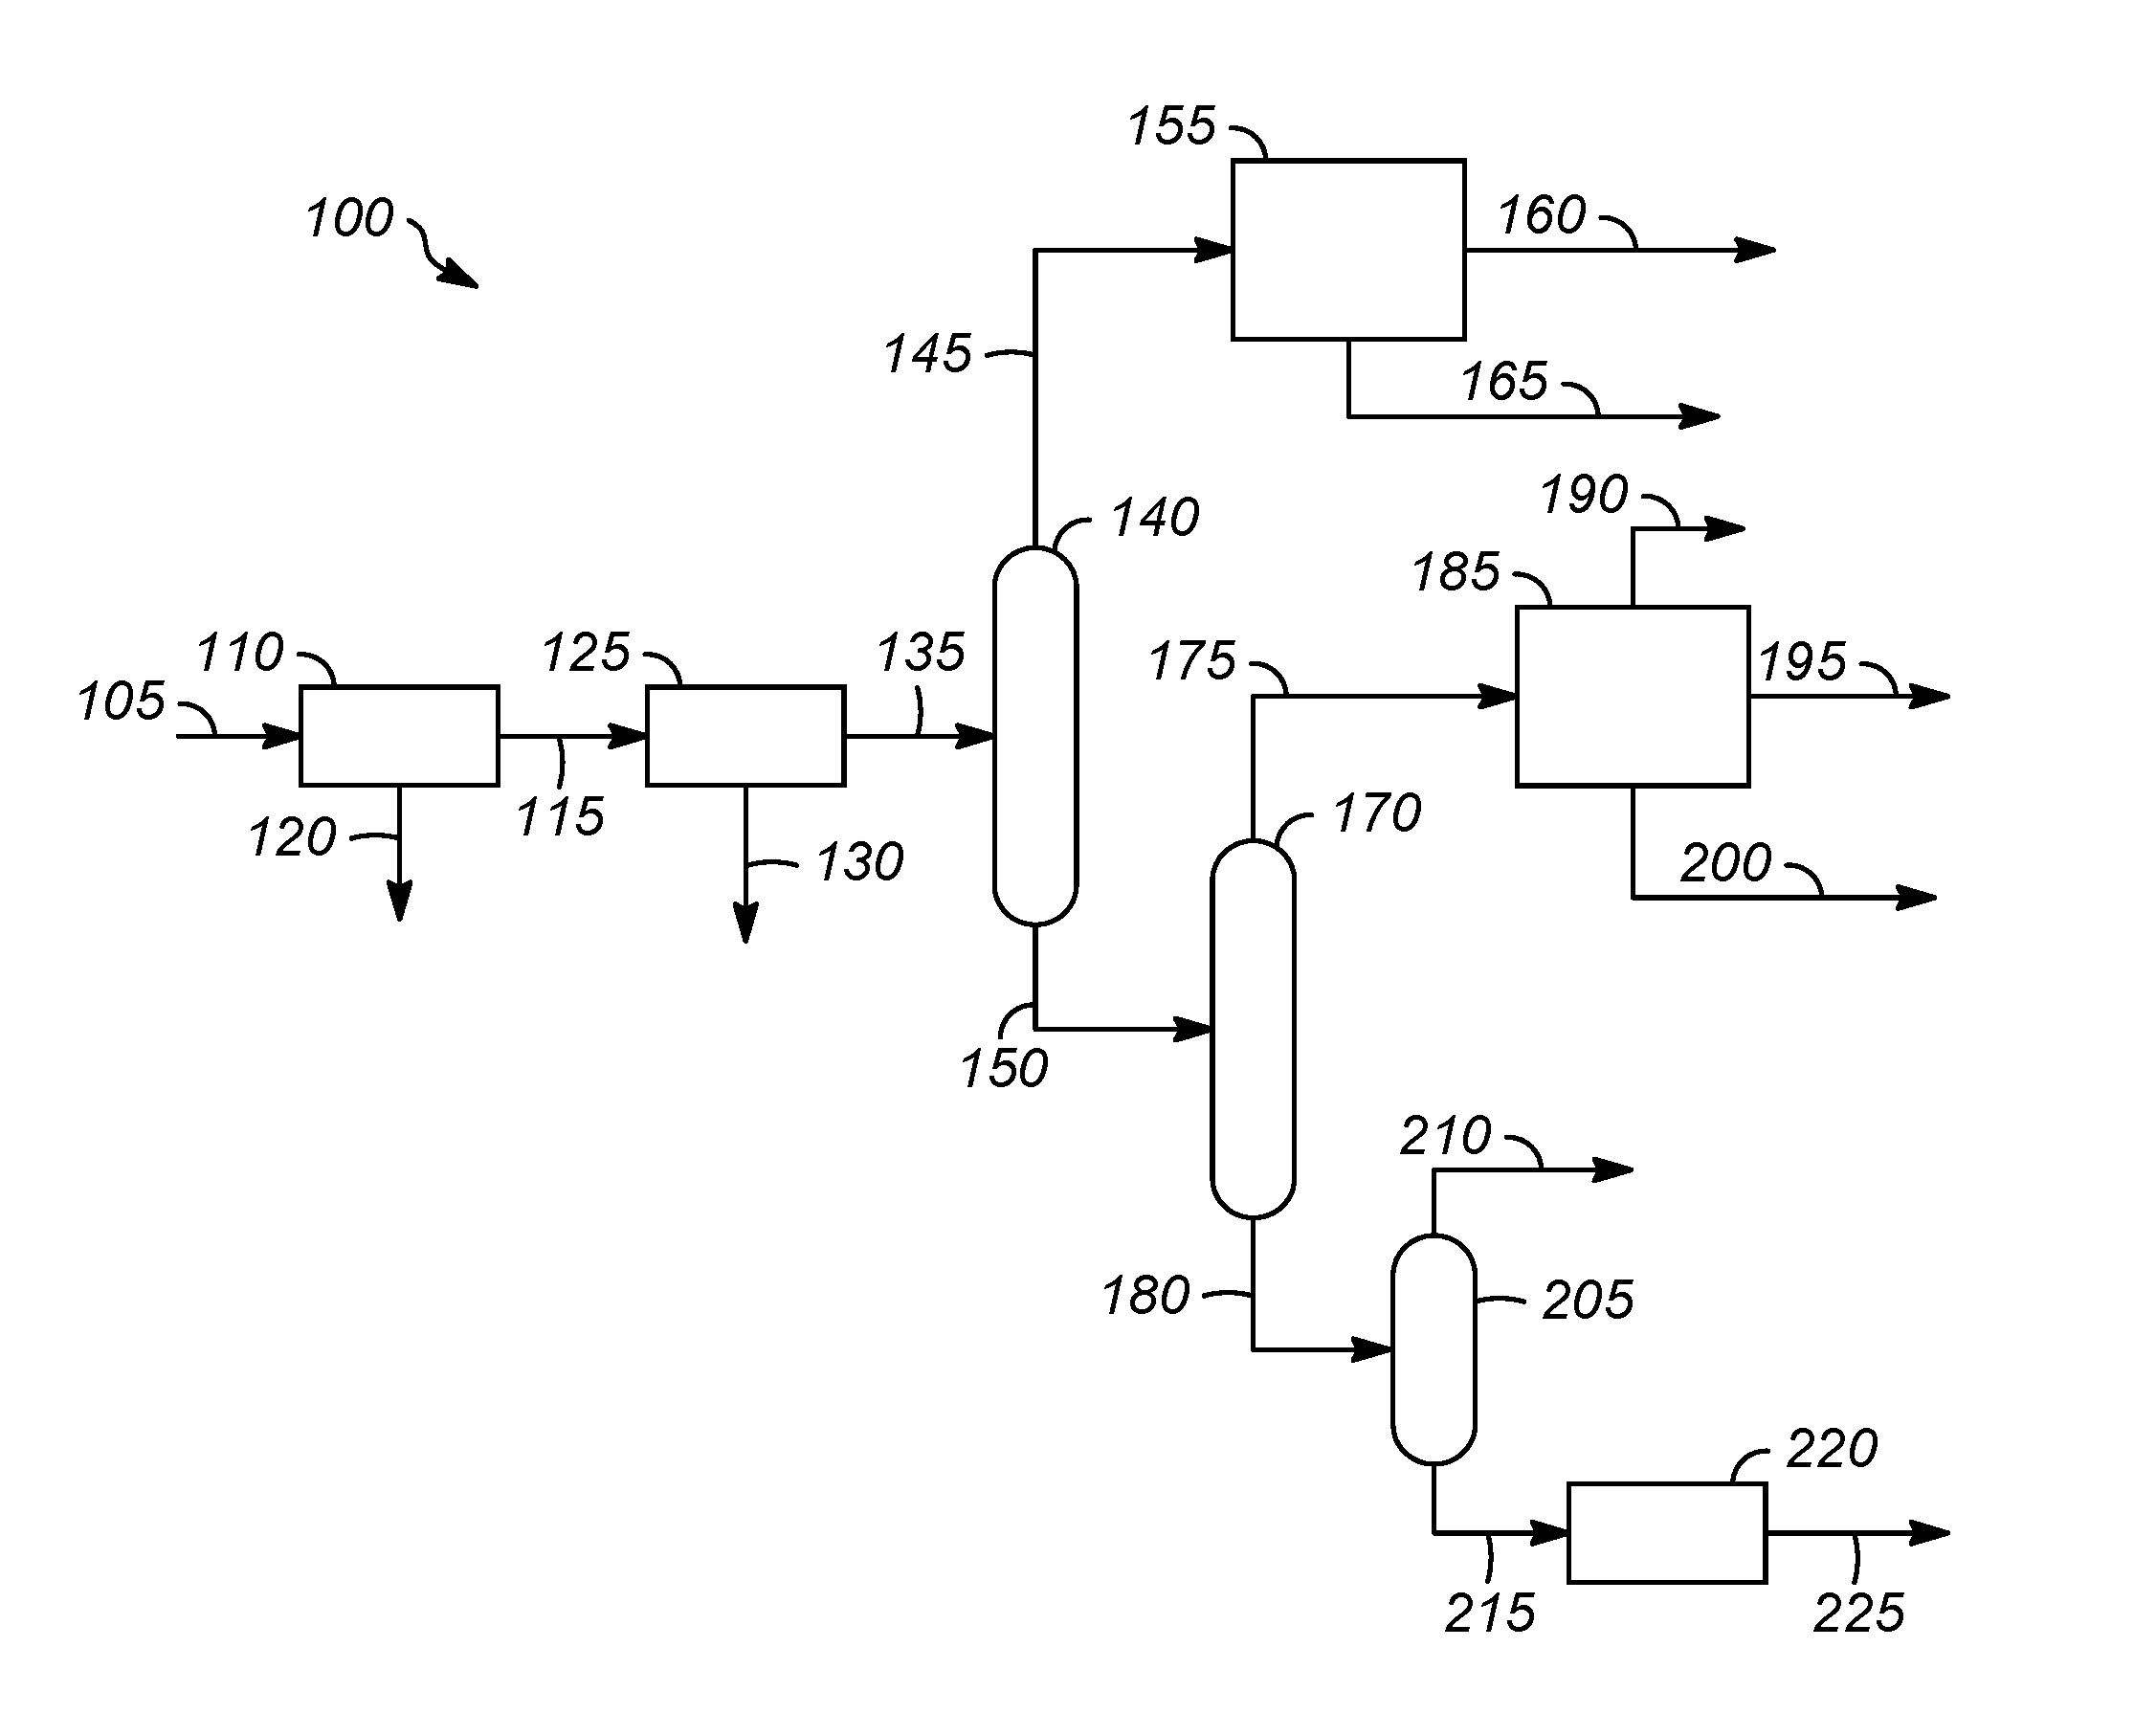 Processes for producing polymer grade light olefins from mixed alcohols